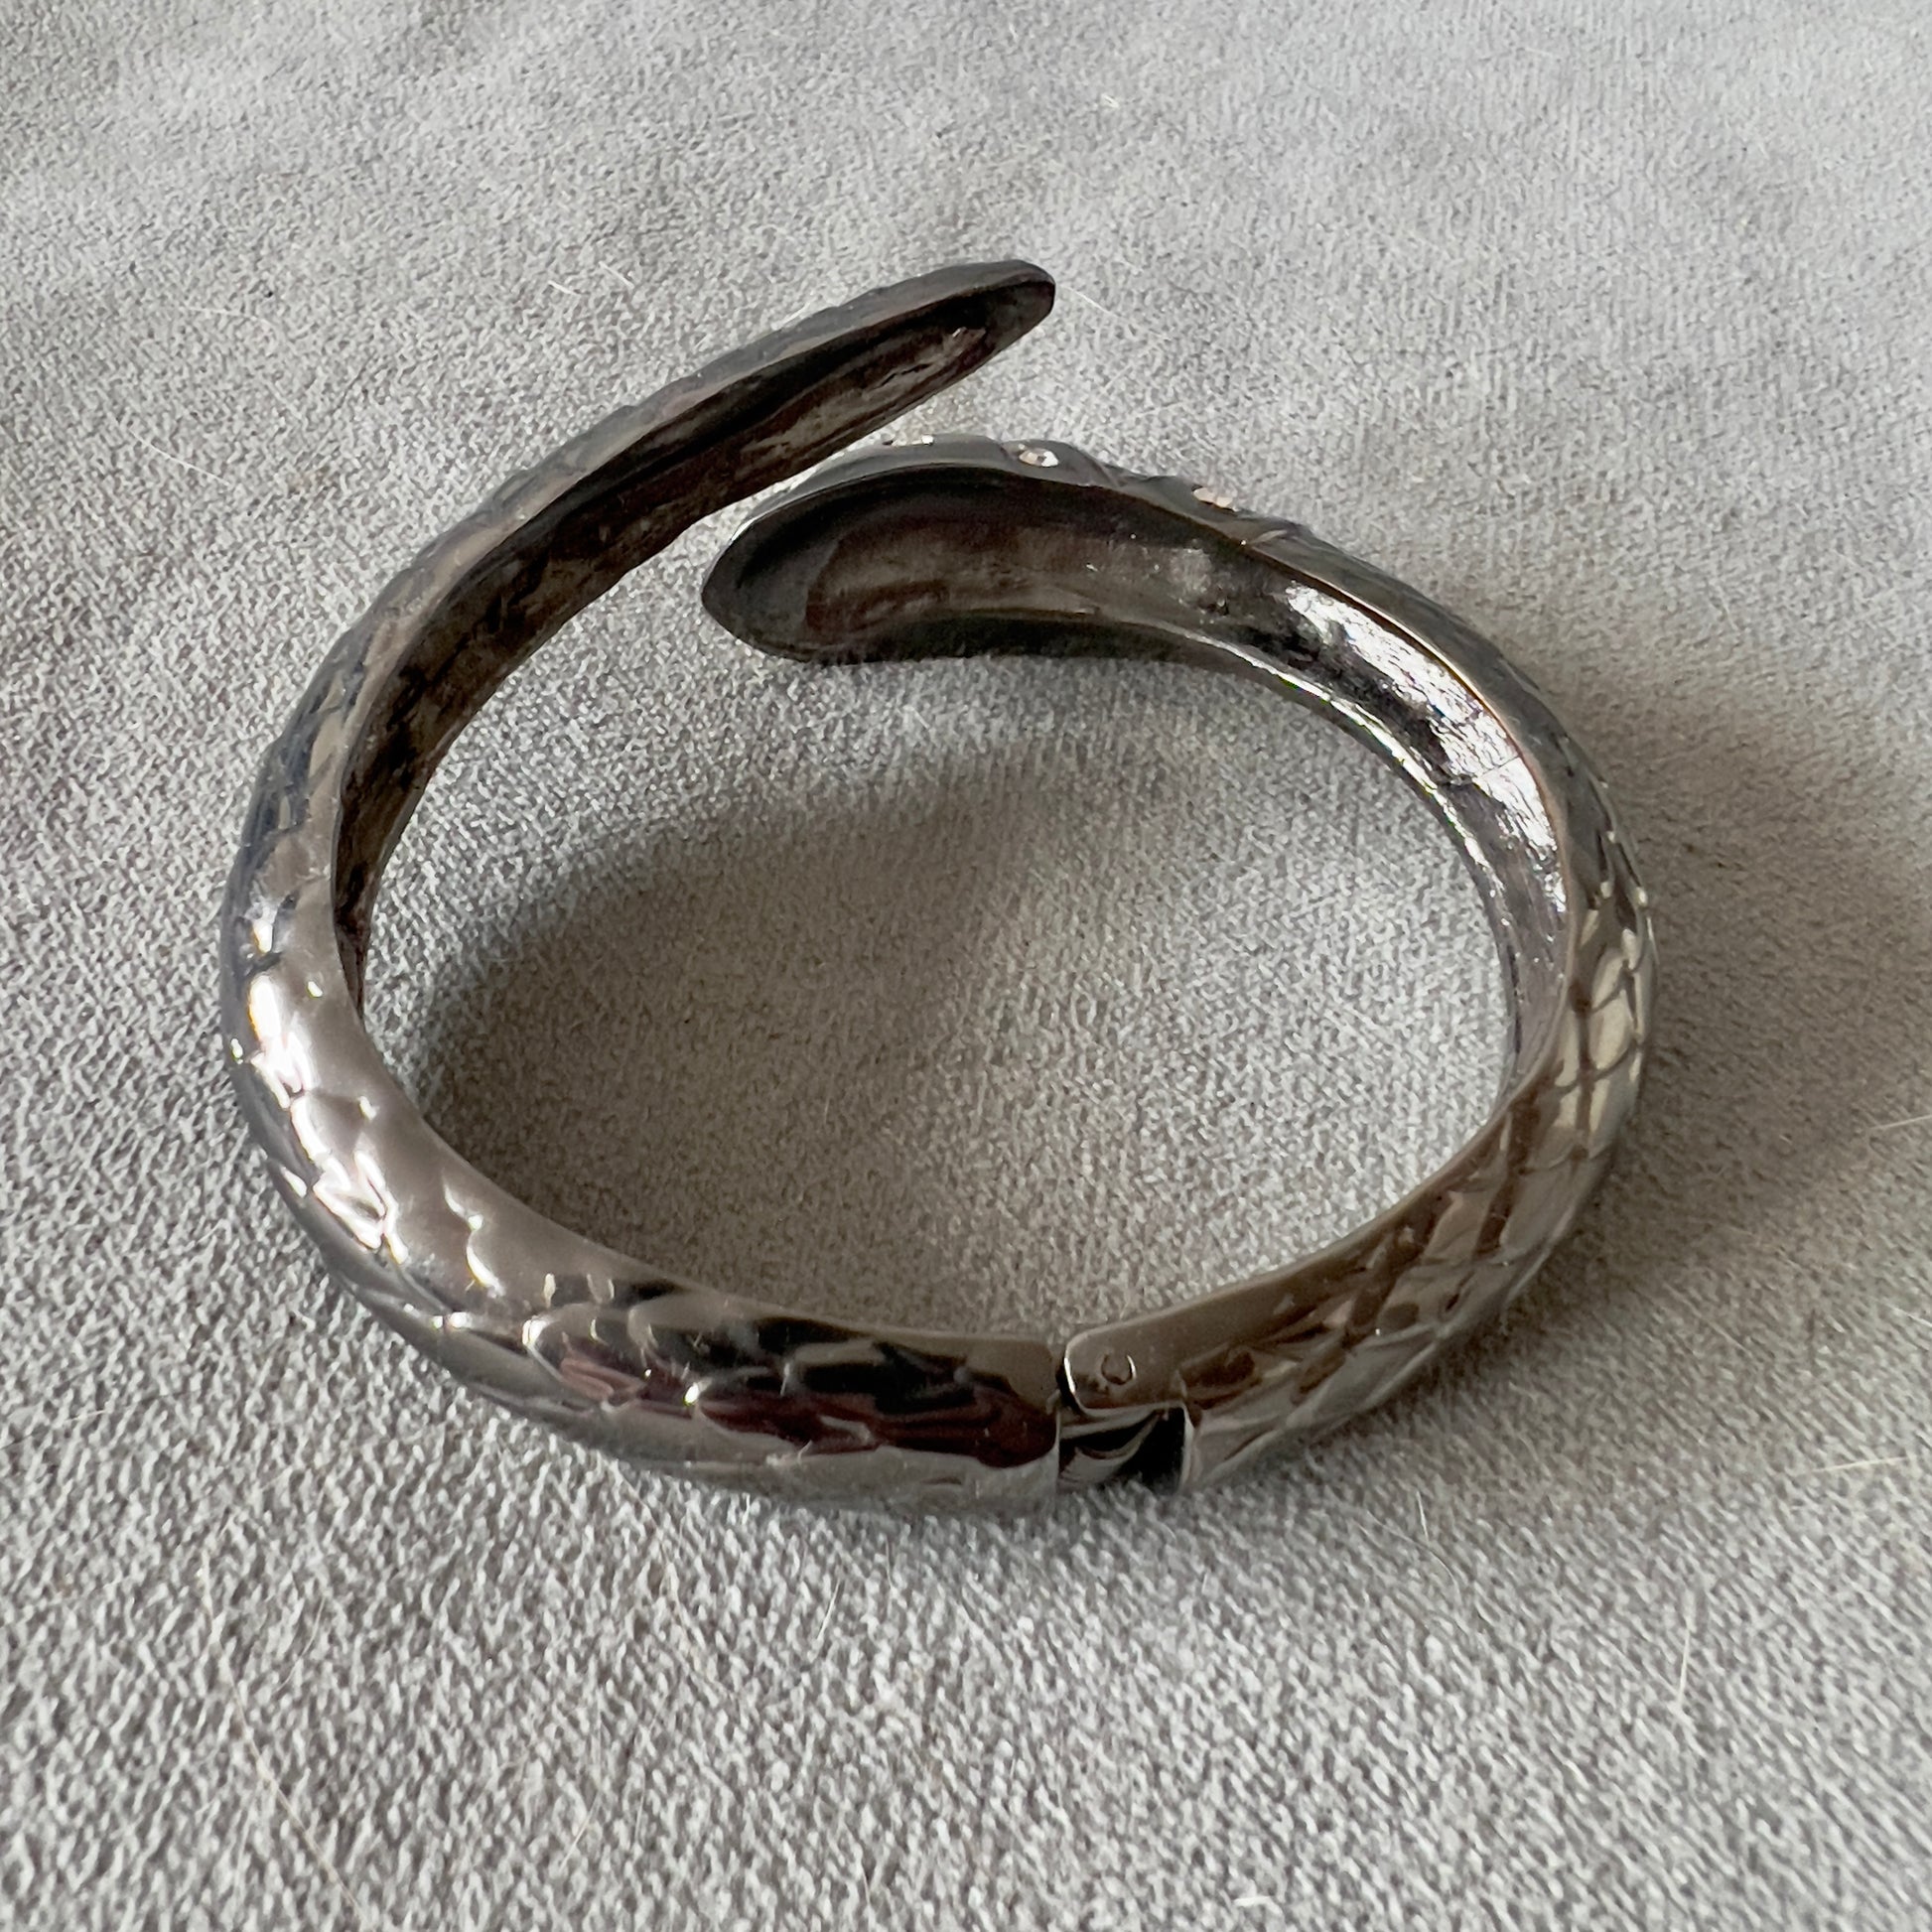 BUCKINGHAM Snake Bracelet with Crystals 6.75 Inches